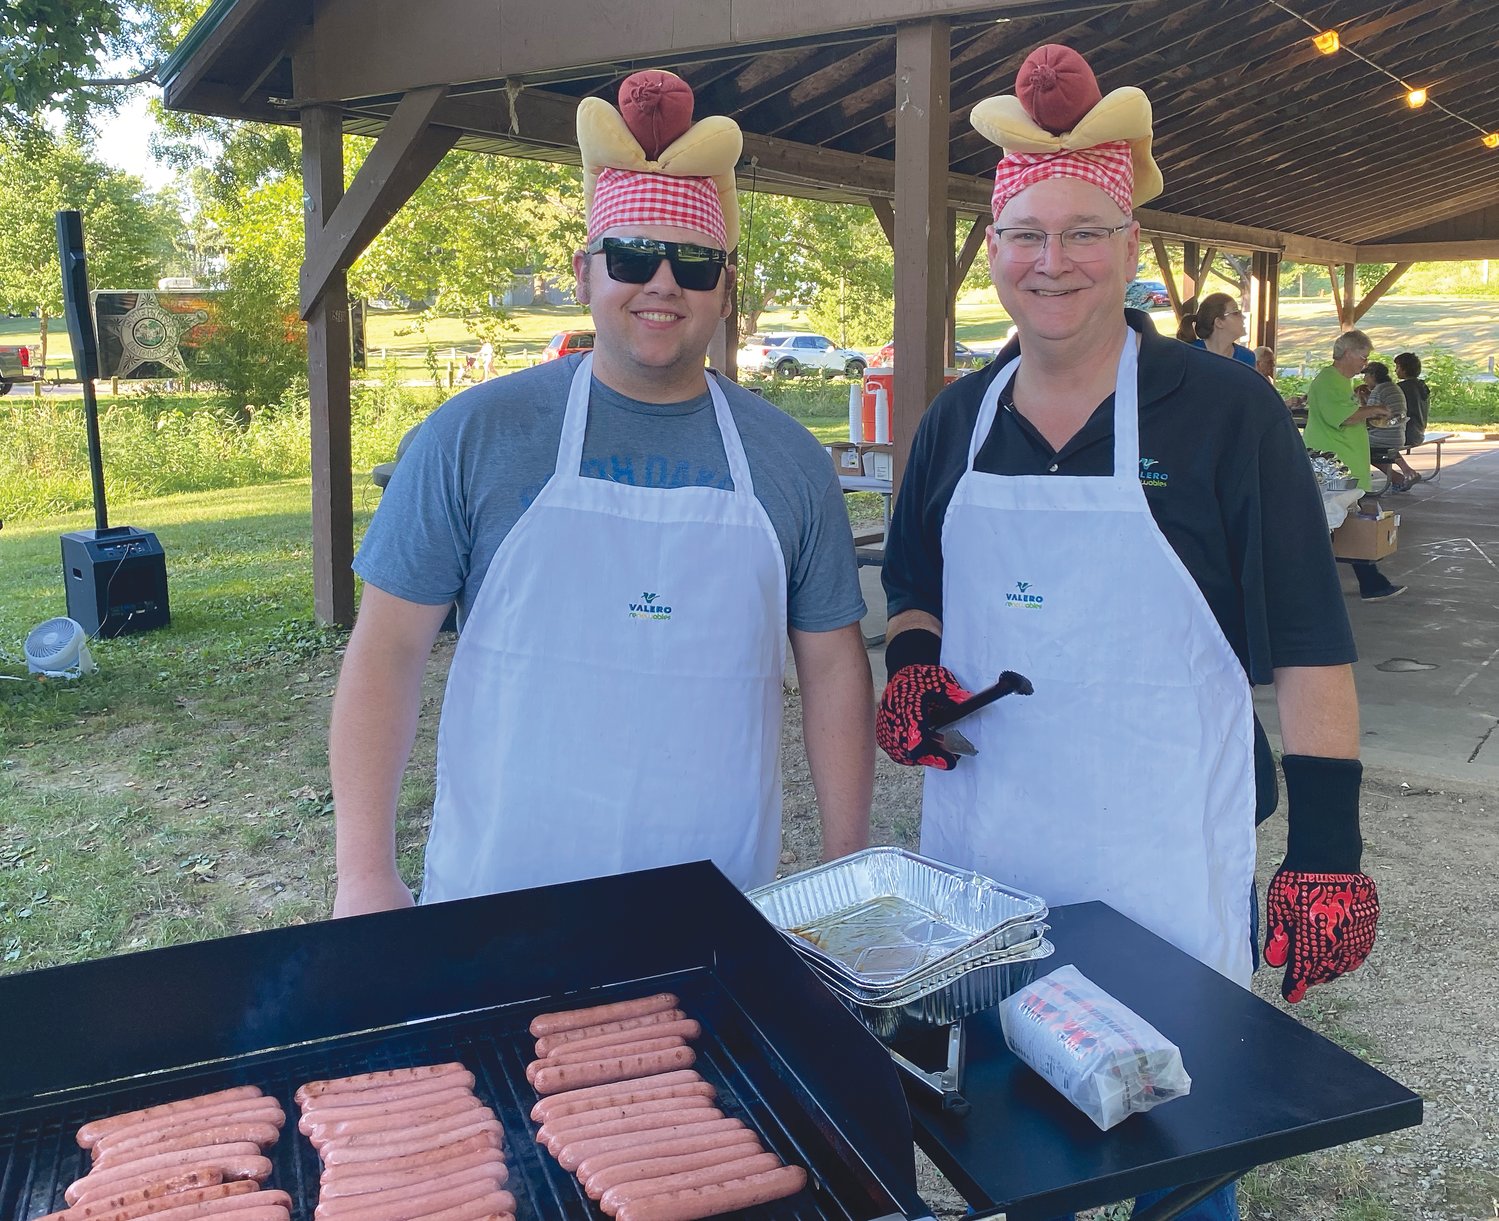 Jake Peterson and Mark Brown from Valero Renewables grill hot dogs for the crowd.